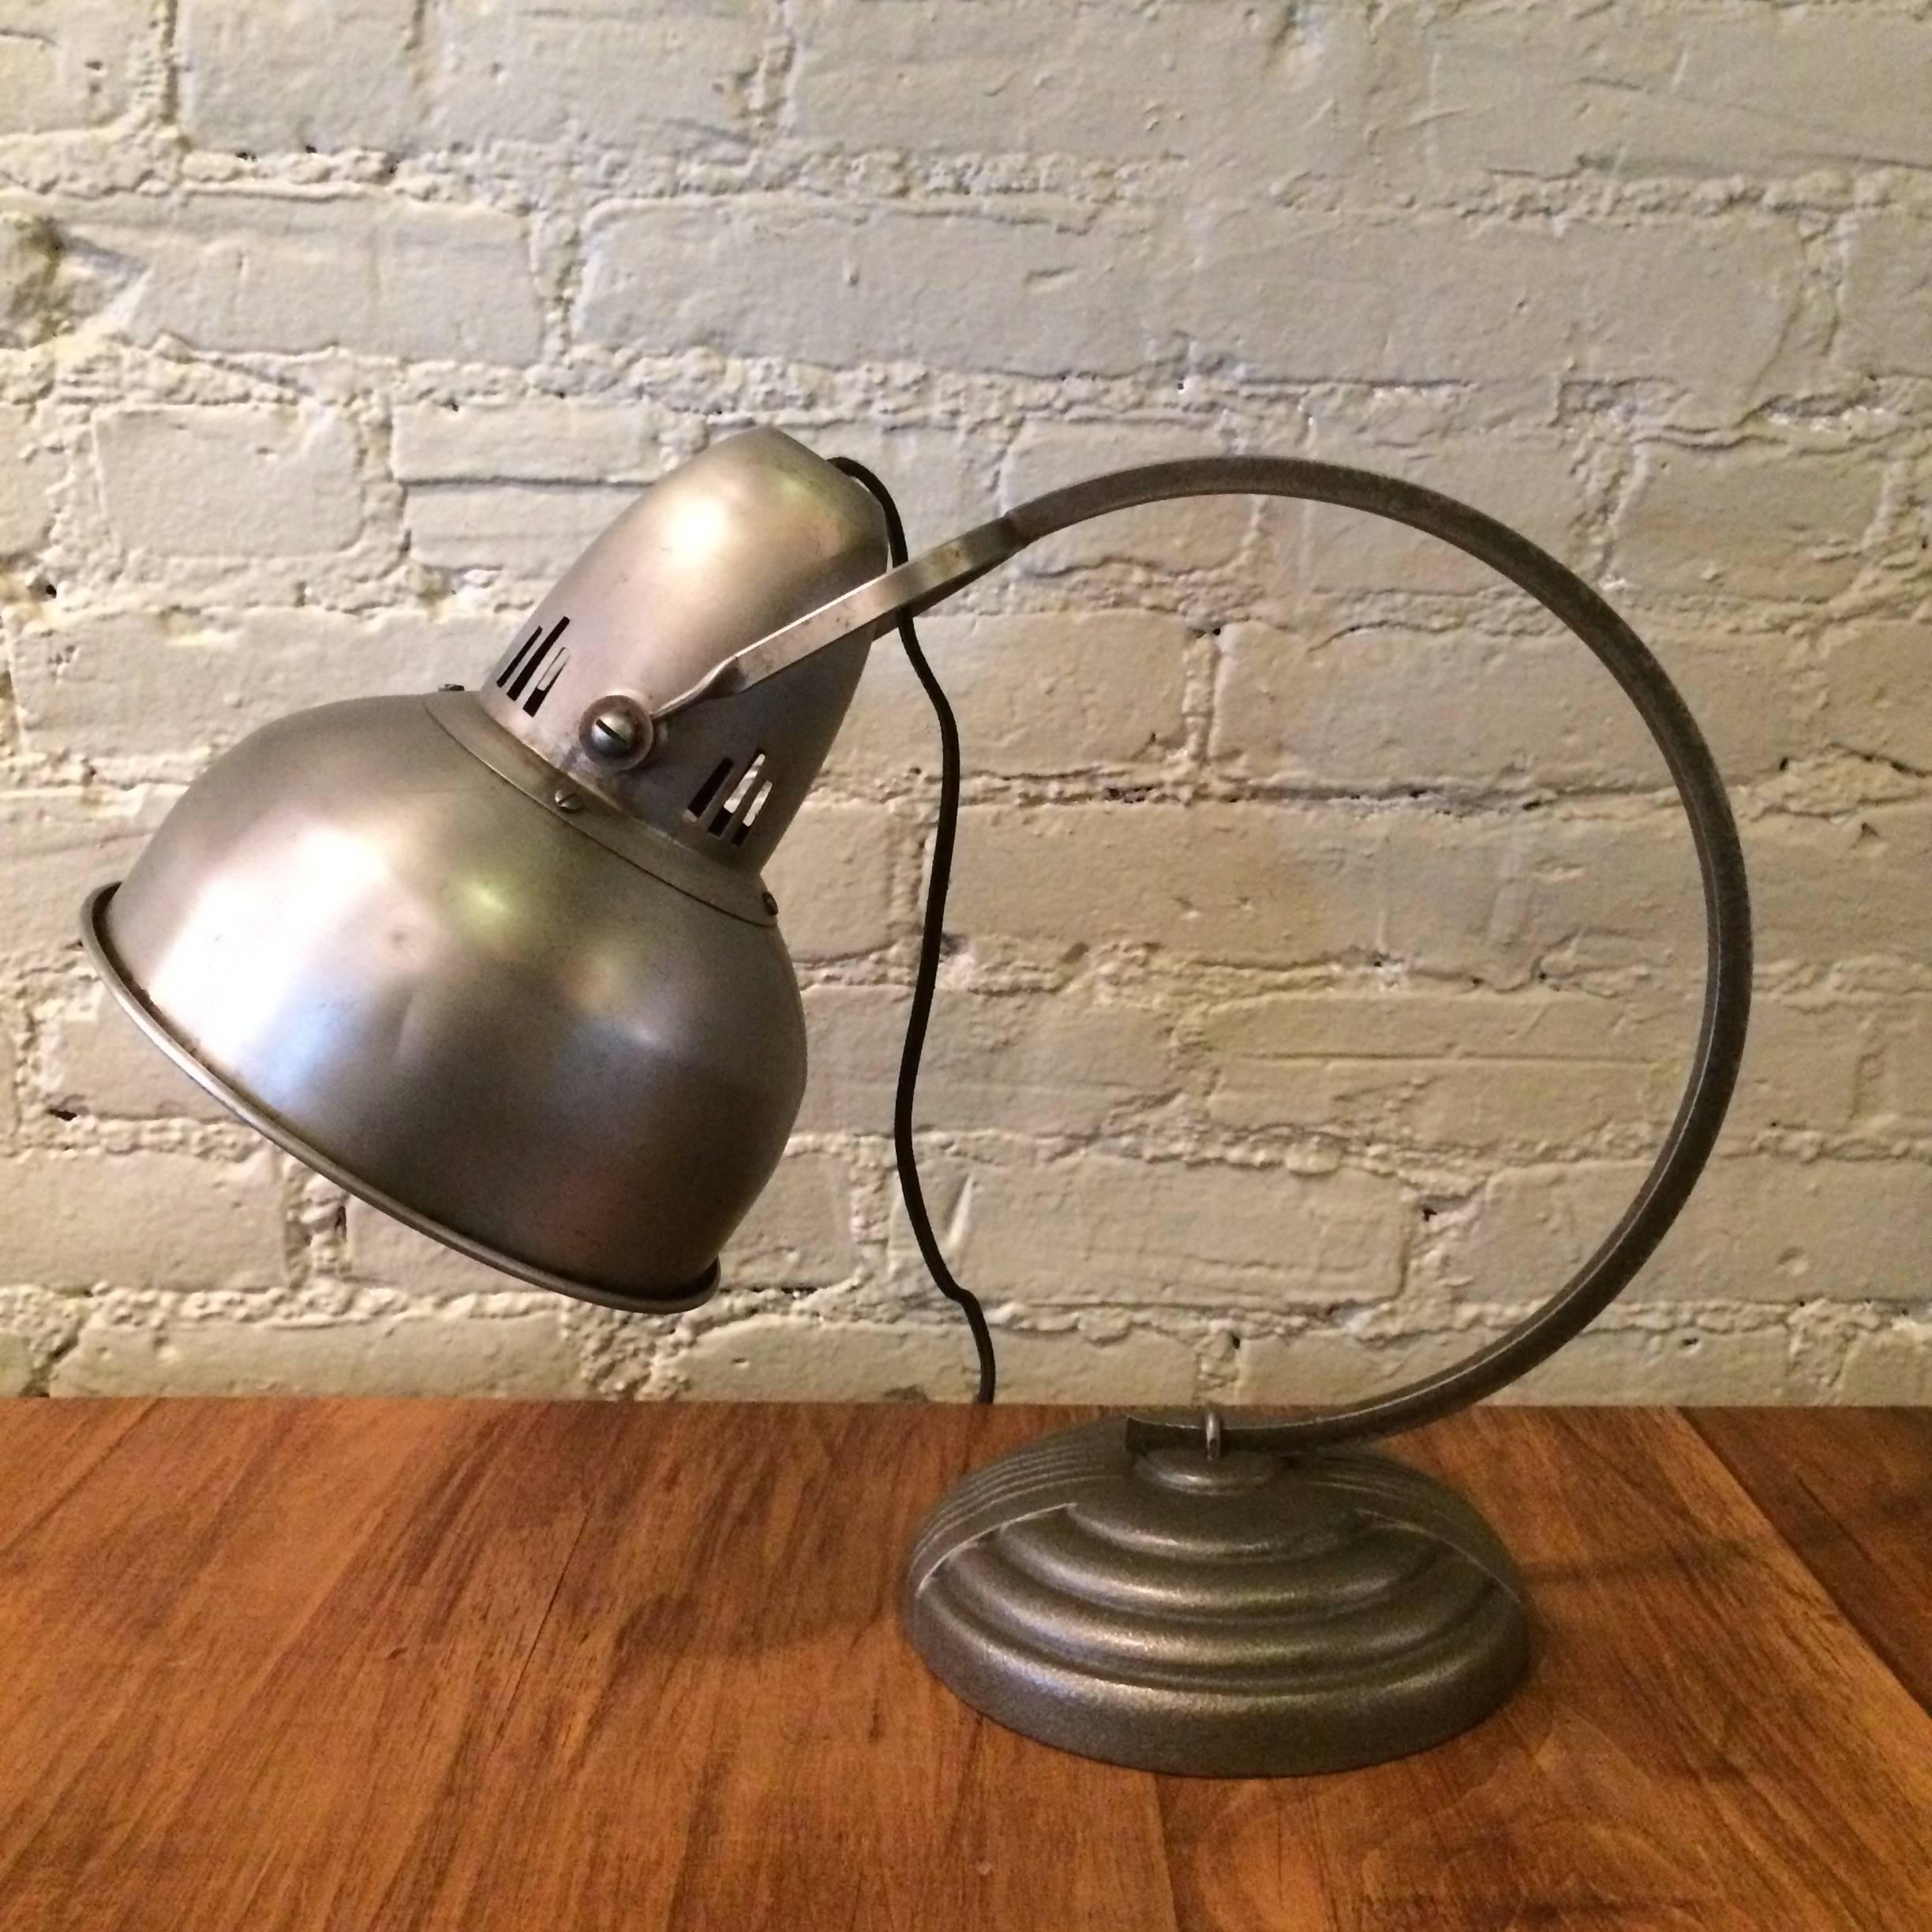 Art Deco, General Electric desk lamp with cast iron base, brushed steel stem and shade that rotates. The lamp is newly wired with cloth cord and can take up to a 200 watt bulb. Shade diameter is 8